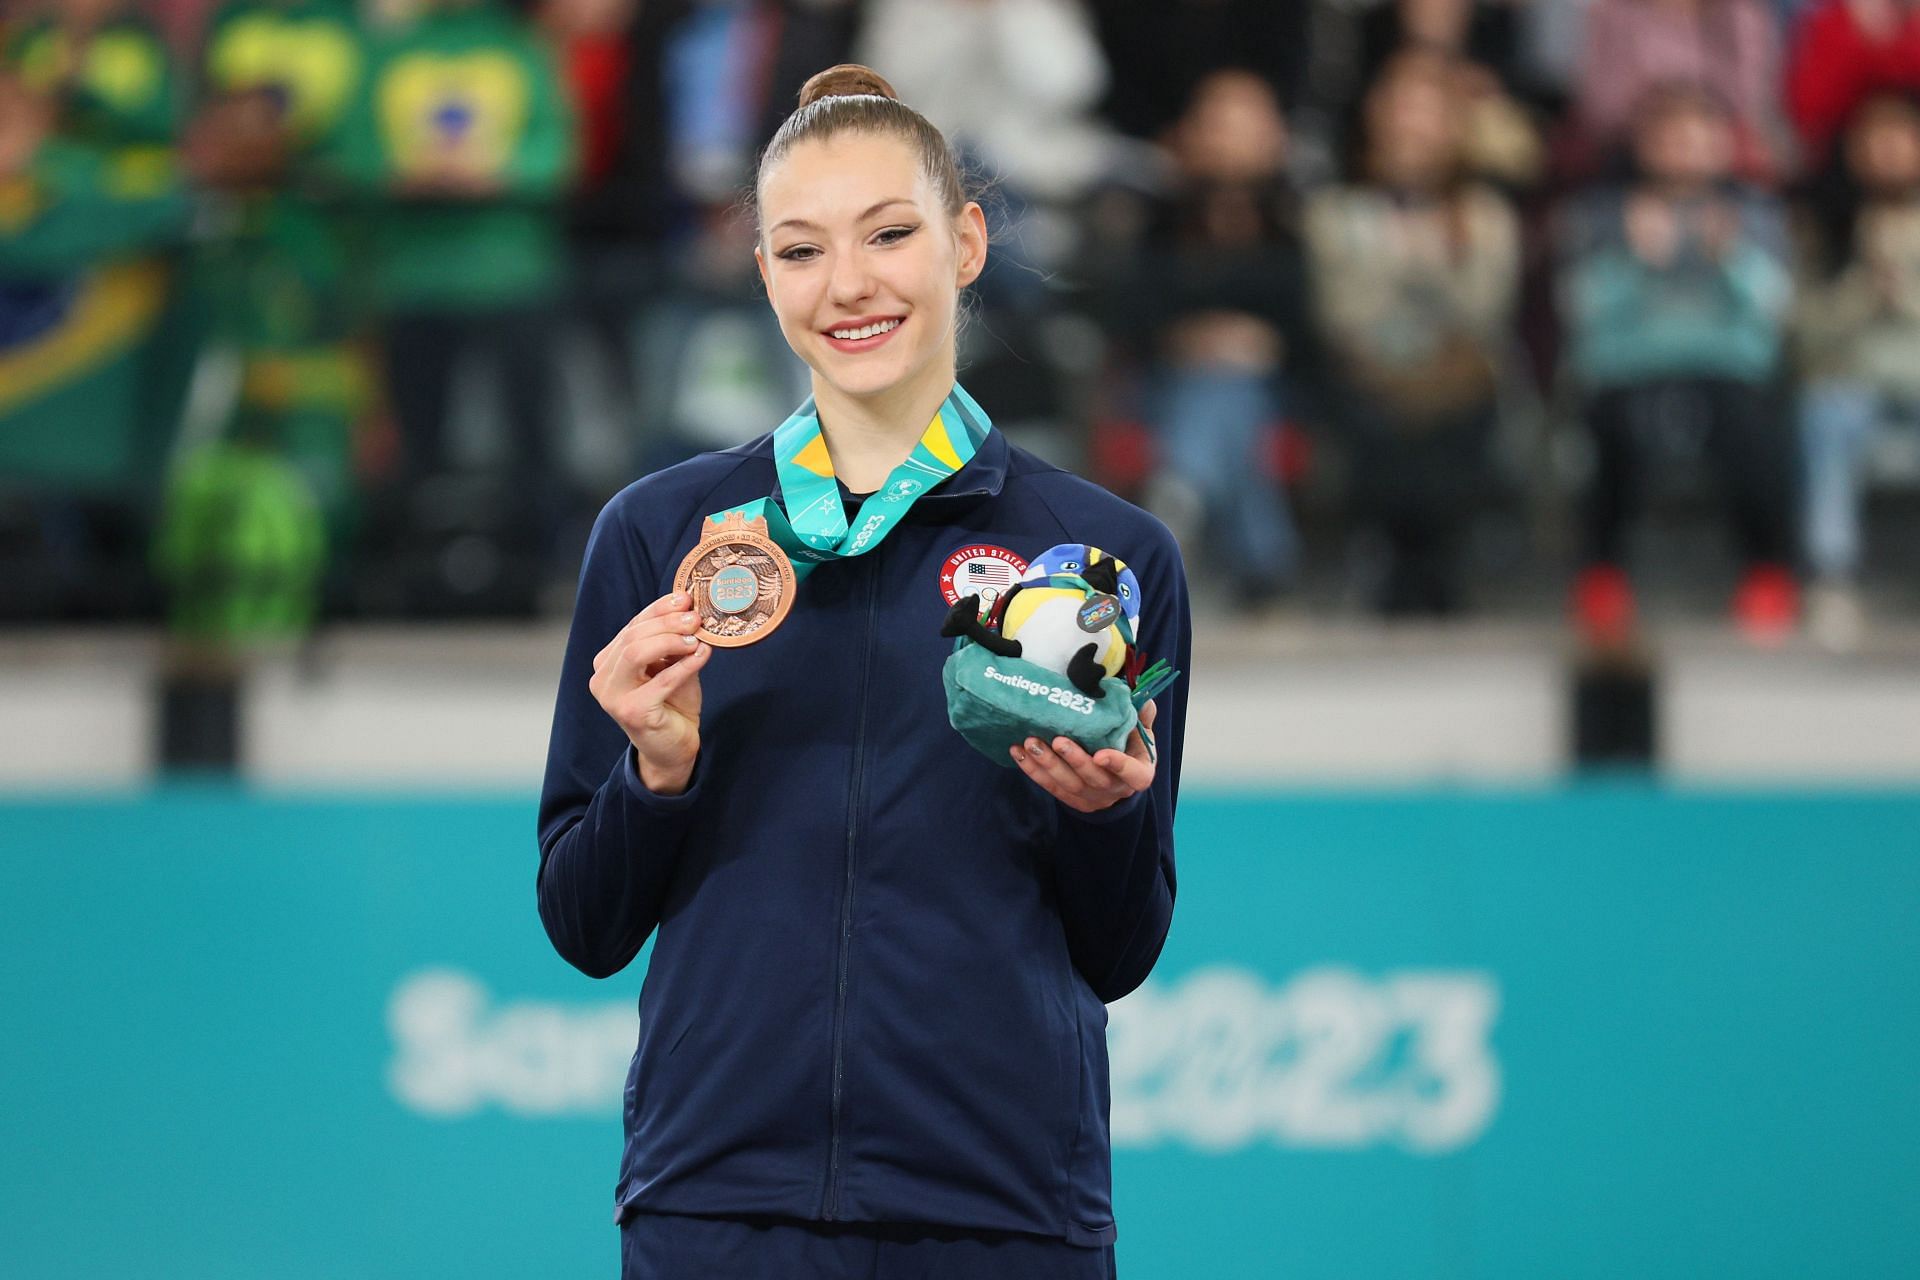 Evita Griskenas poses on the podium for - Rhythmic Gymnastics - Individual Hoop at the 2023 Pan Am Games in Santiago, Chile.